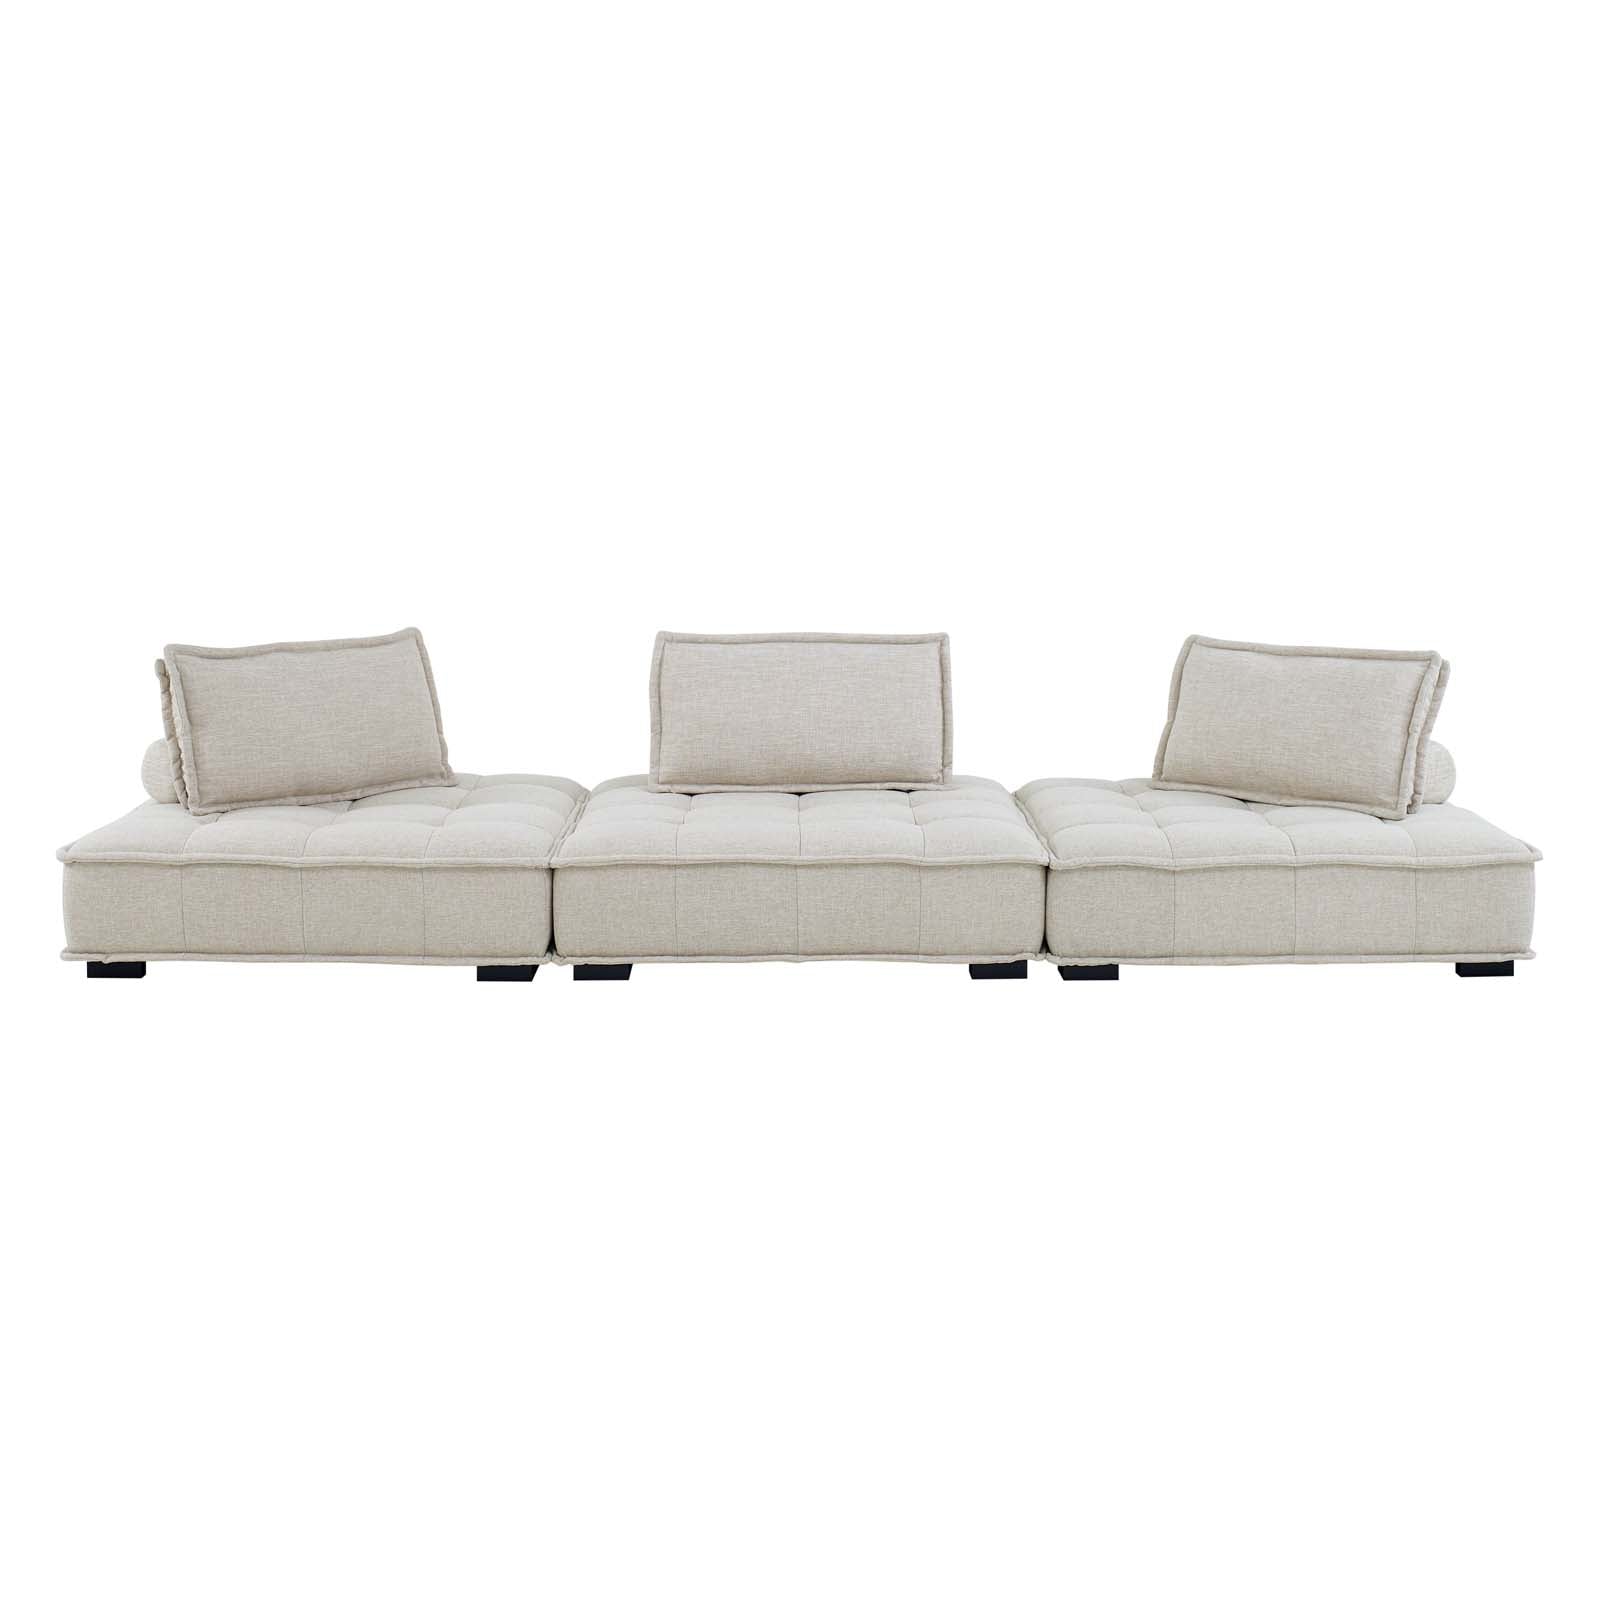 Modway Sofas & Couches - Saunter-Tufted-Fabric-Fabric-3-Piece-Sofa-Beige